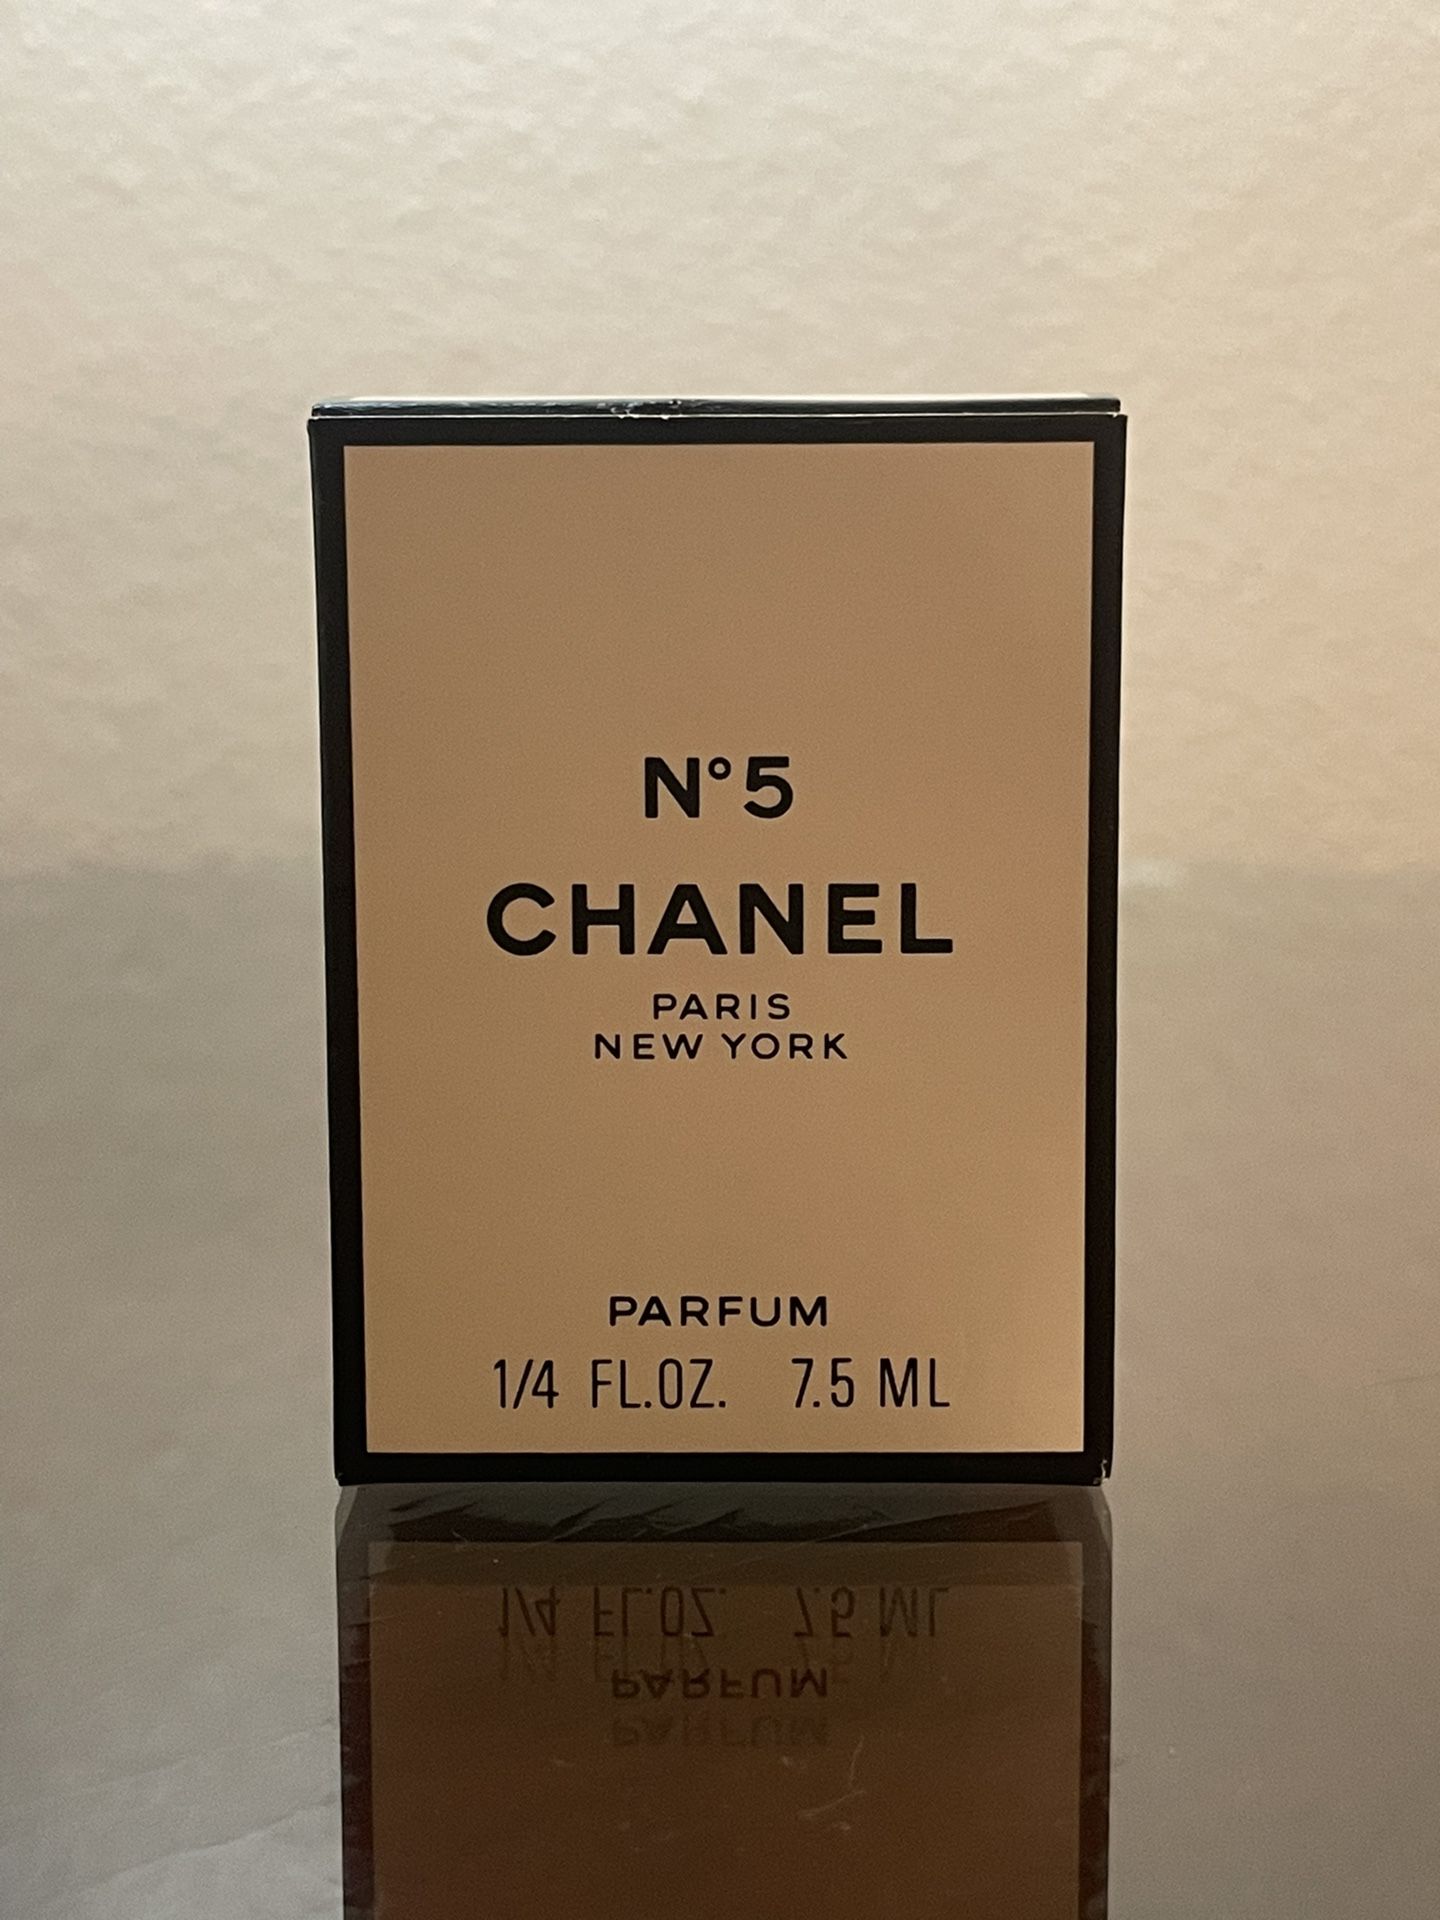 Chanel No. 5 Parfum 7.5mL New In Box for Sale in Irvine, CA - OfferUp